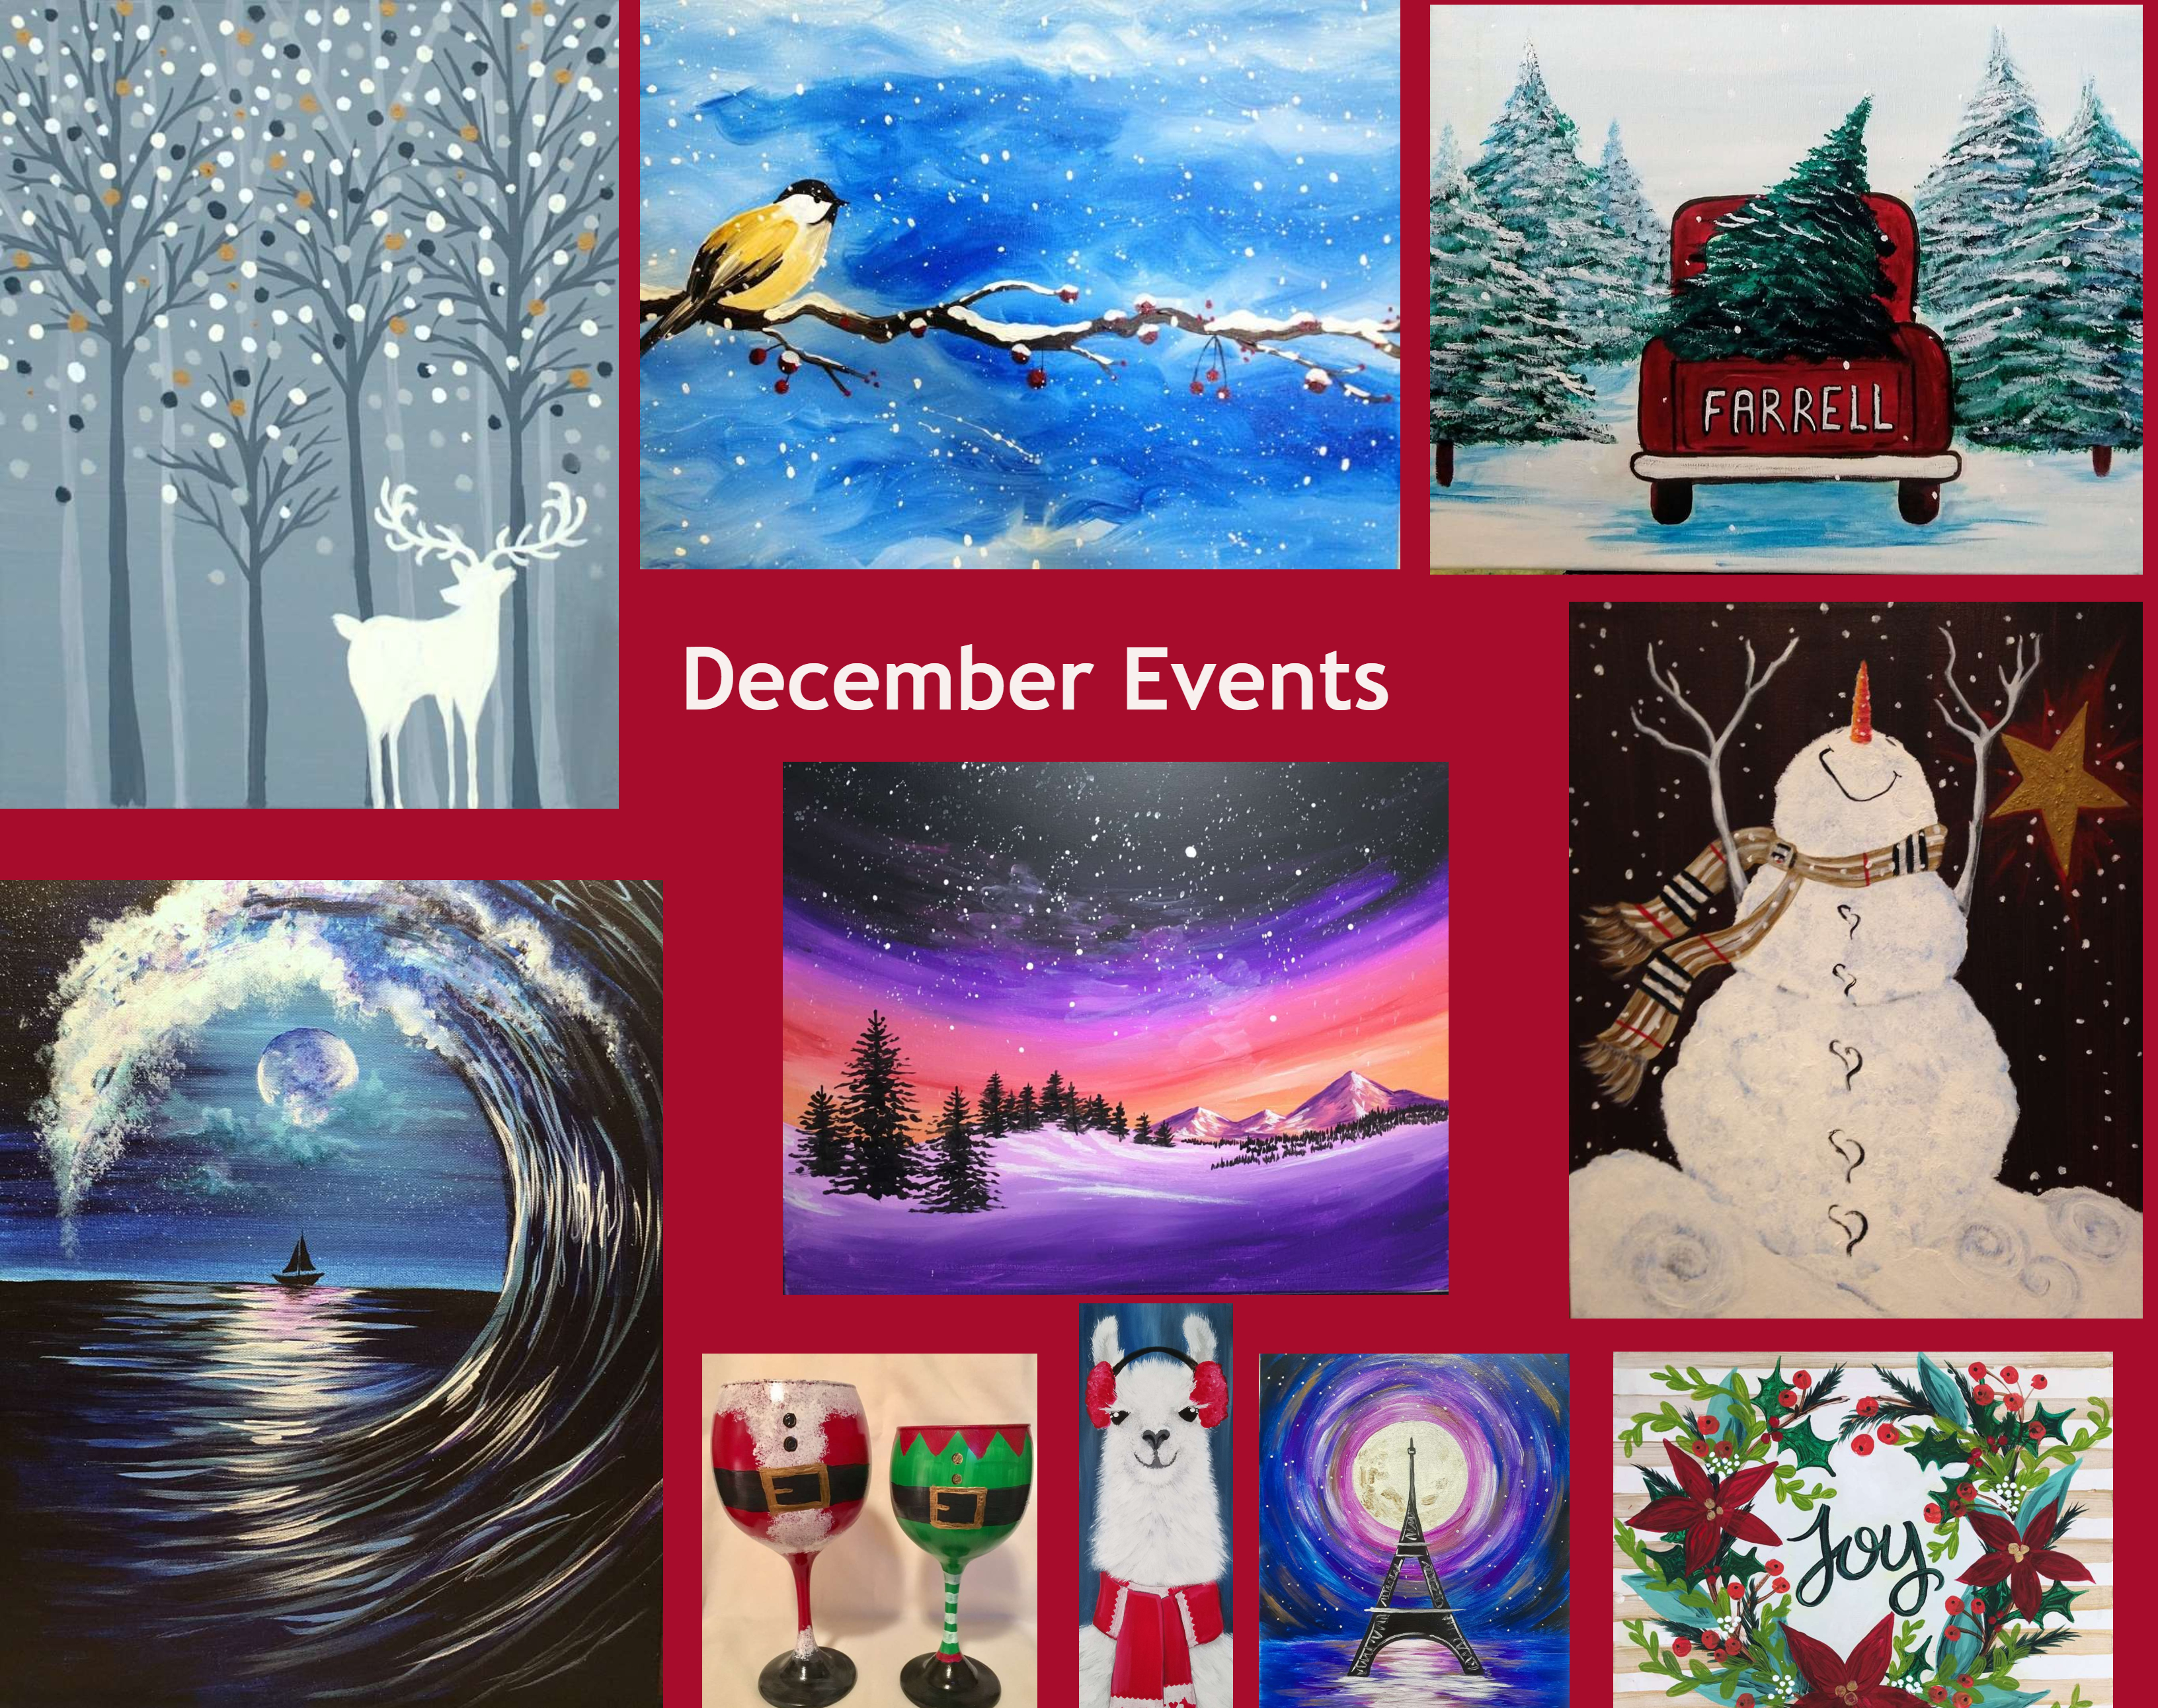 Our December Calendar is Filled With Holiday Cheer!